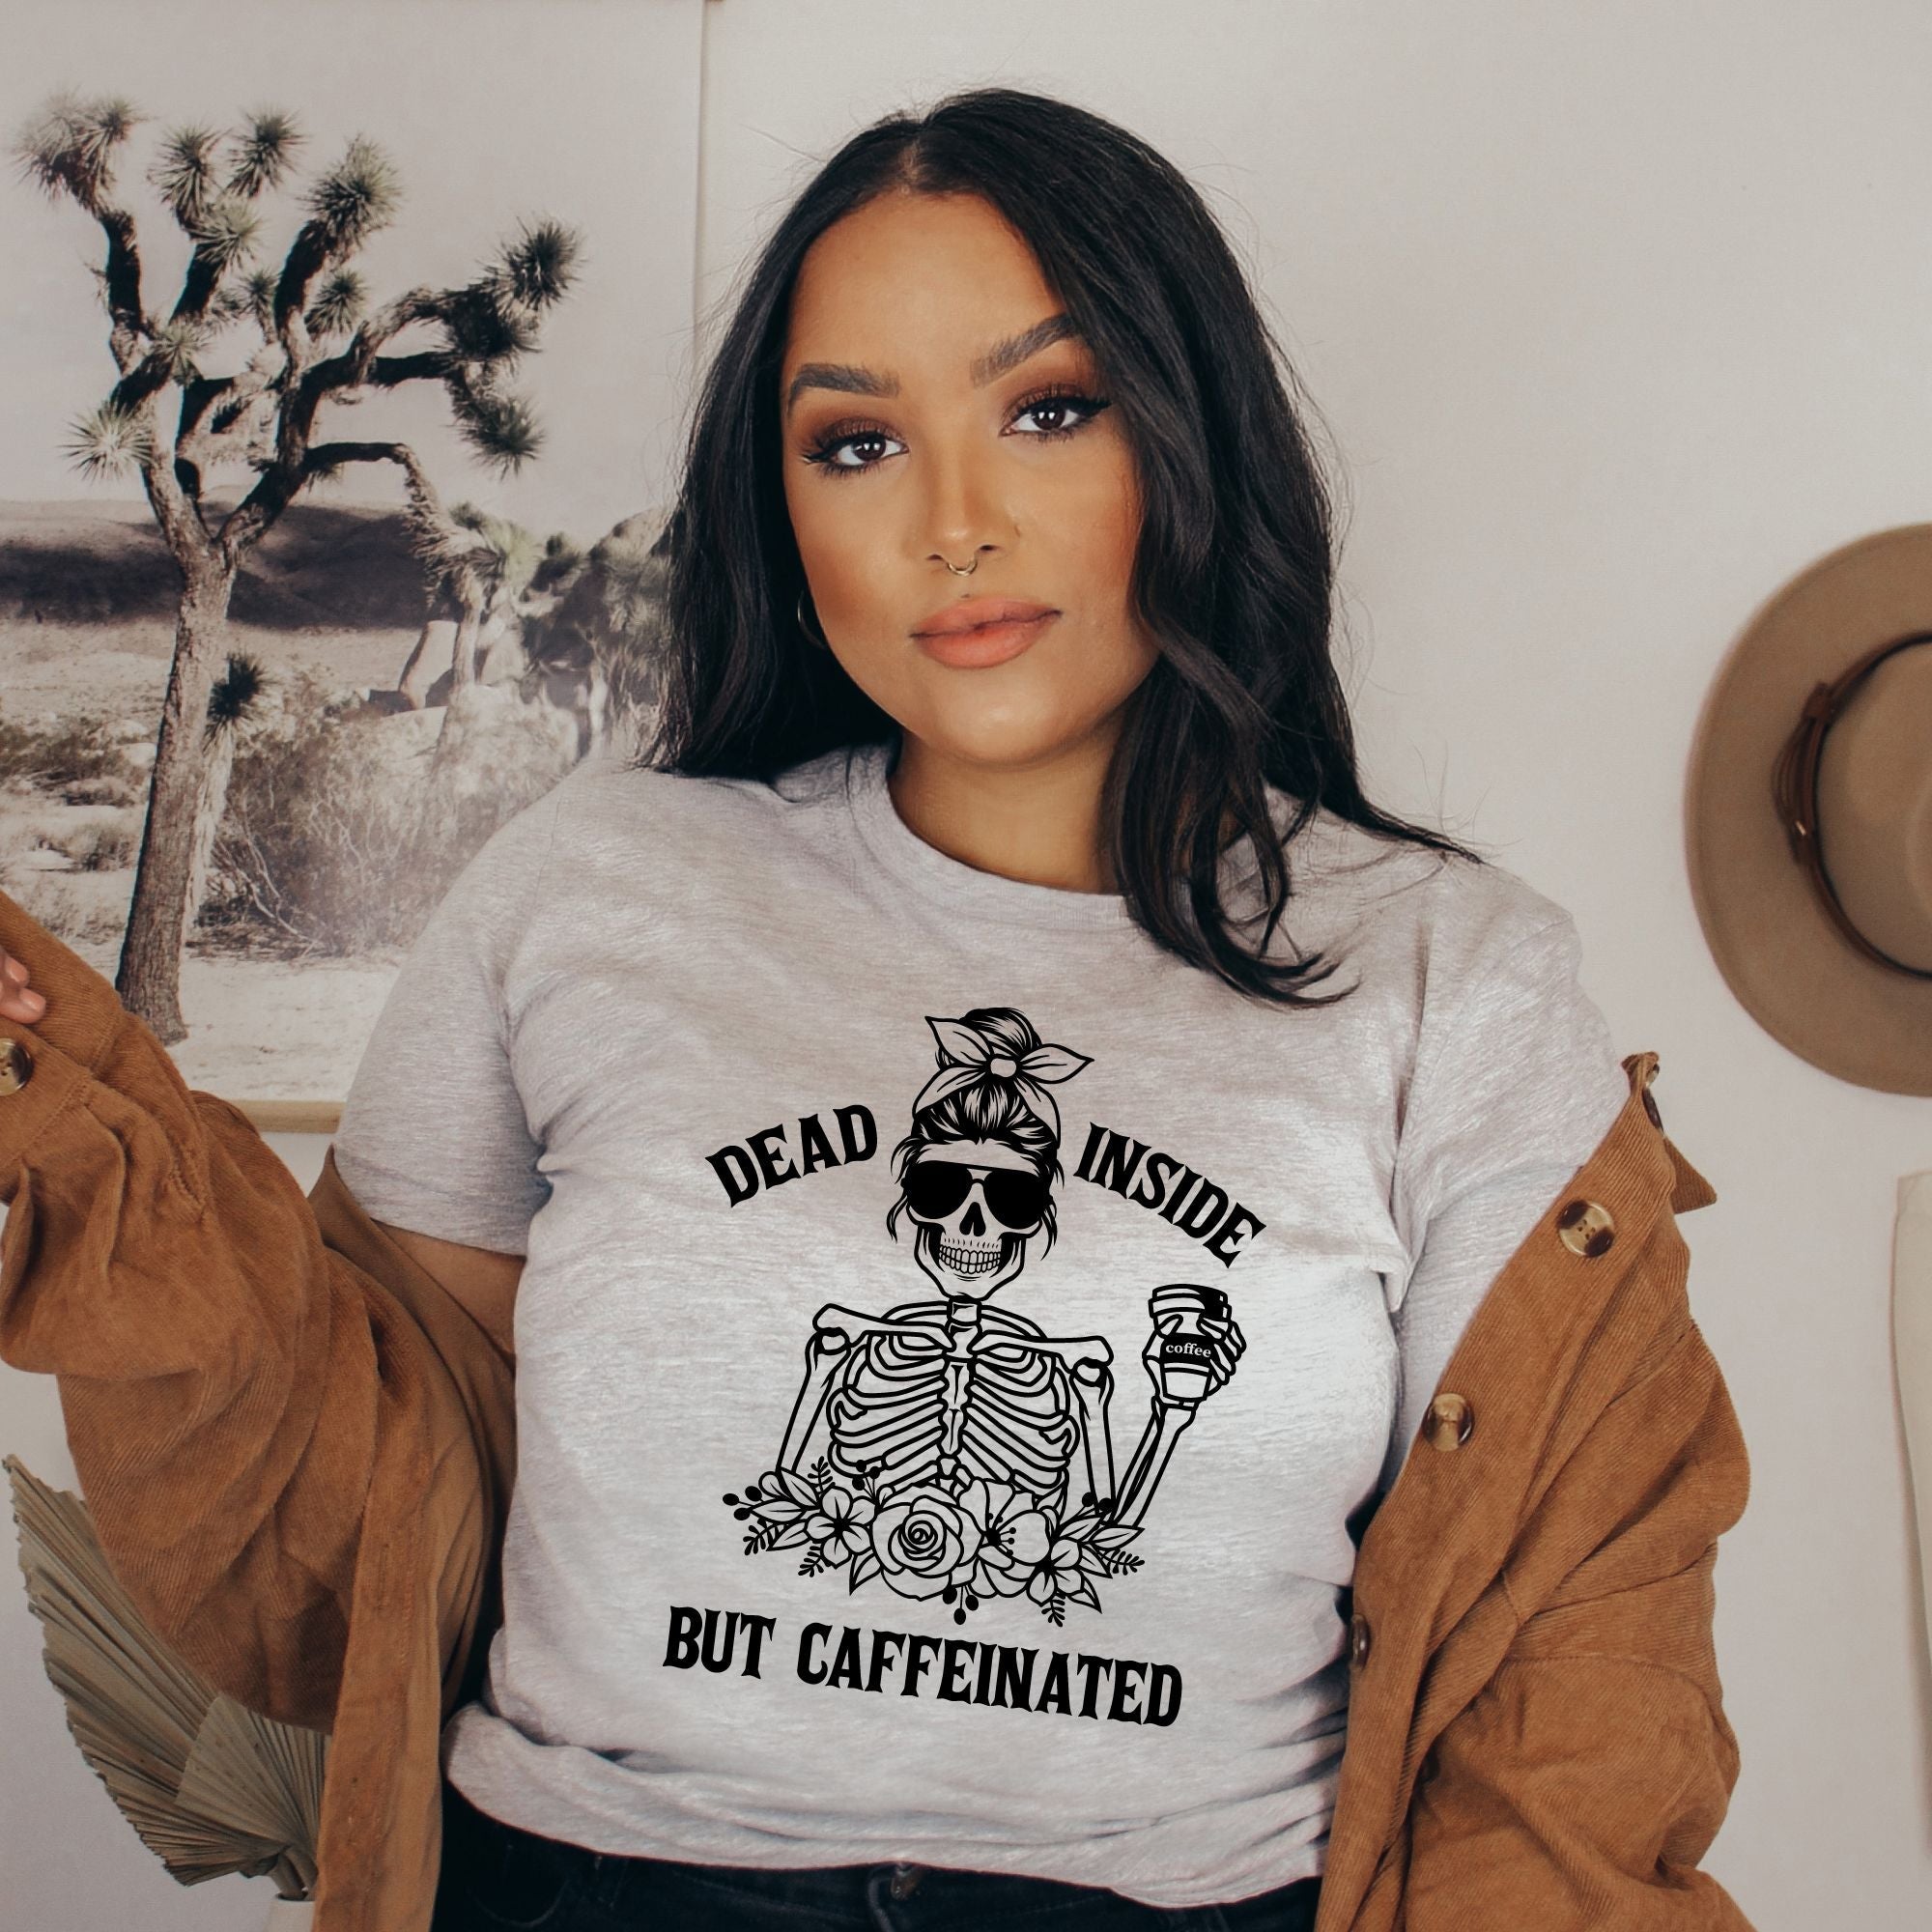 Dead Inside But Caffeinated Floral Skeleton Graphic Tee for Women *UNISEX FIT*-208 Tees Wholesale, Idaho